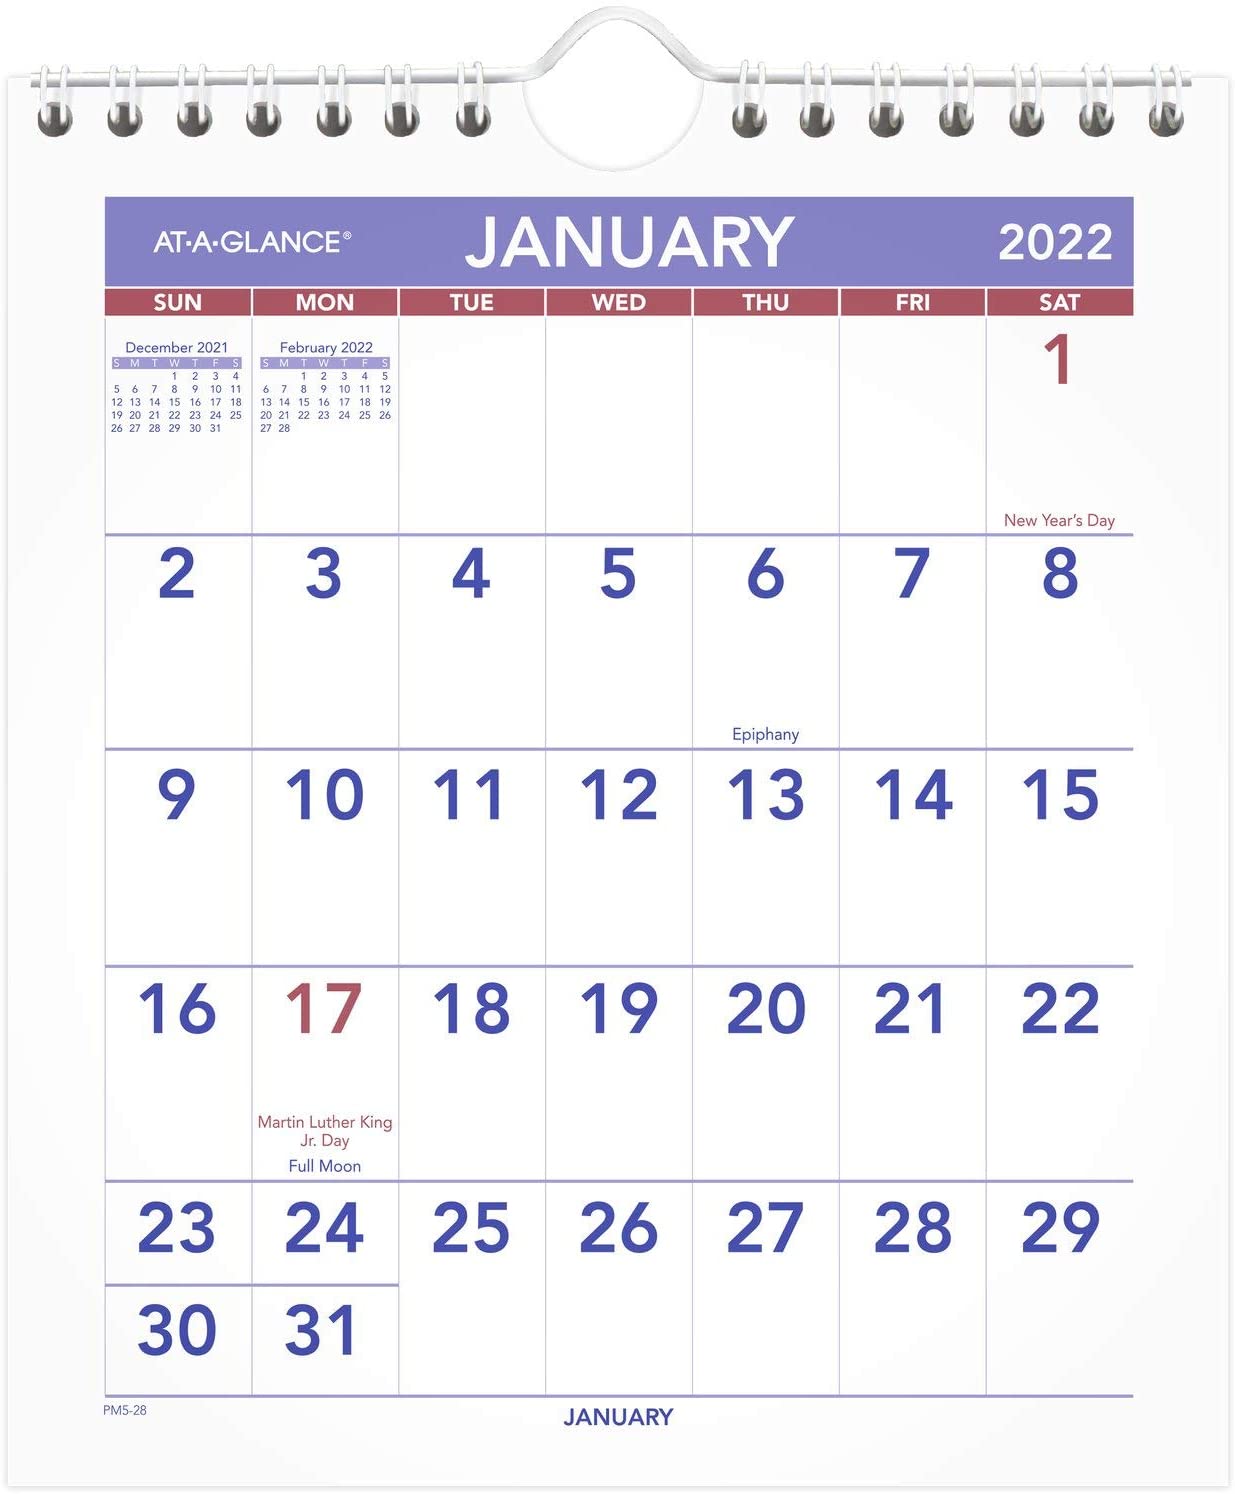 ''2022 Wall CALENDAR by AT-A-GLANCE, 7'''' x 8'''', Mini, Monthly (PM528)''